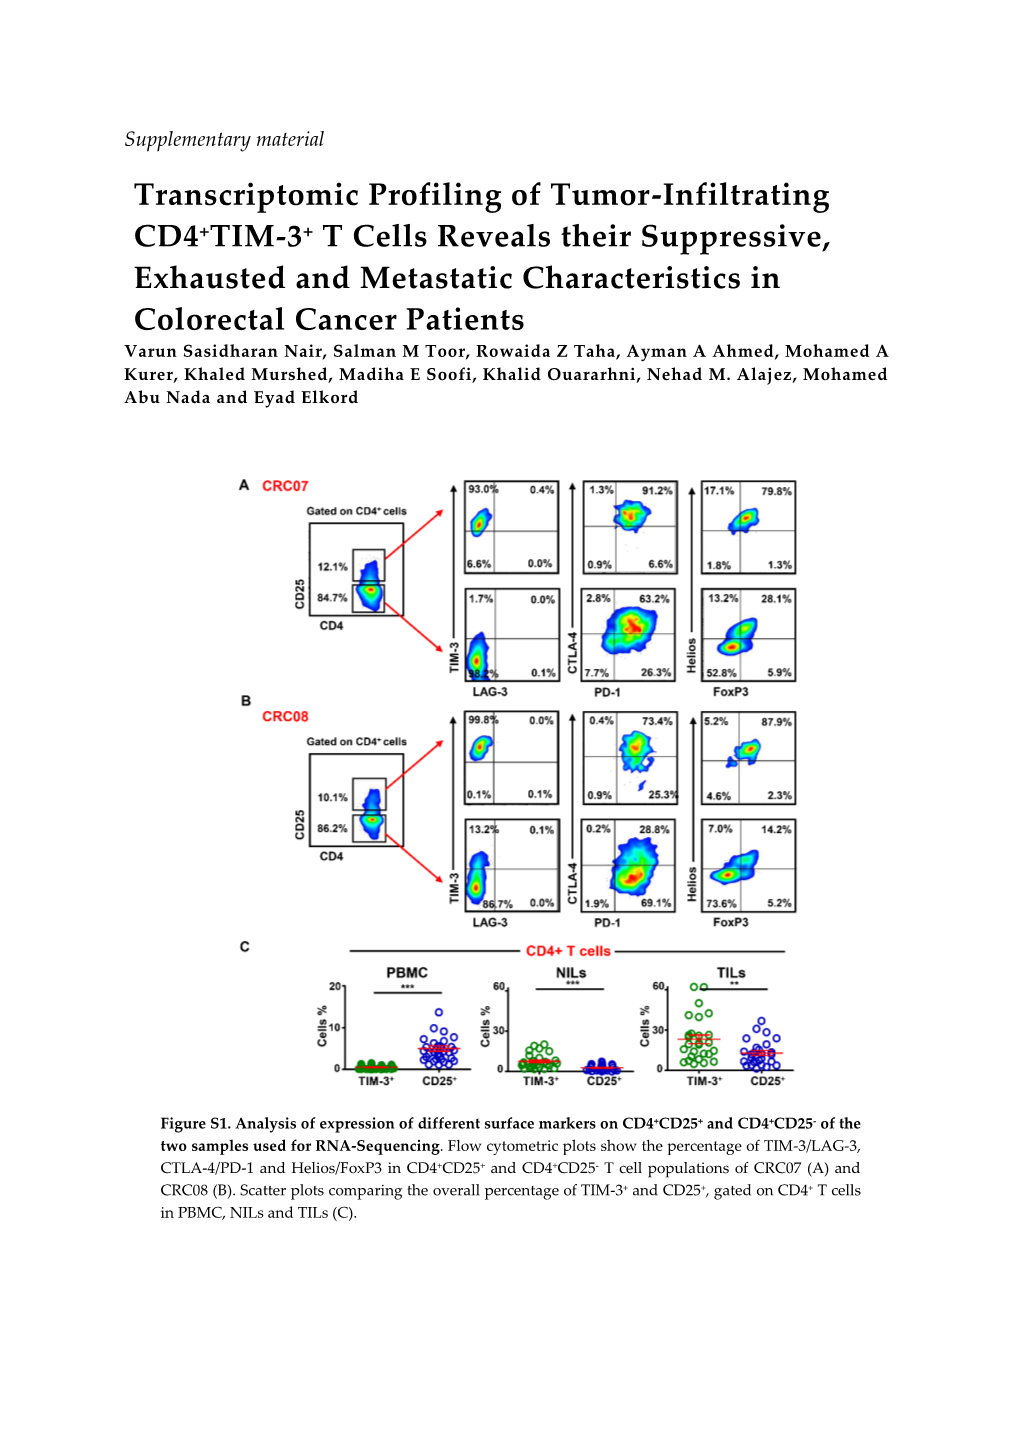 Transcriptomic Profiling of Tumor-Infiltrating CD4+TIM-3+ T Cells Reveals Their Suppressive, Exhausted and Metastatic Characteristics In